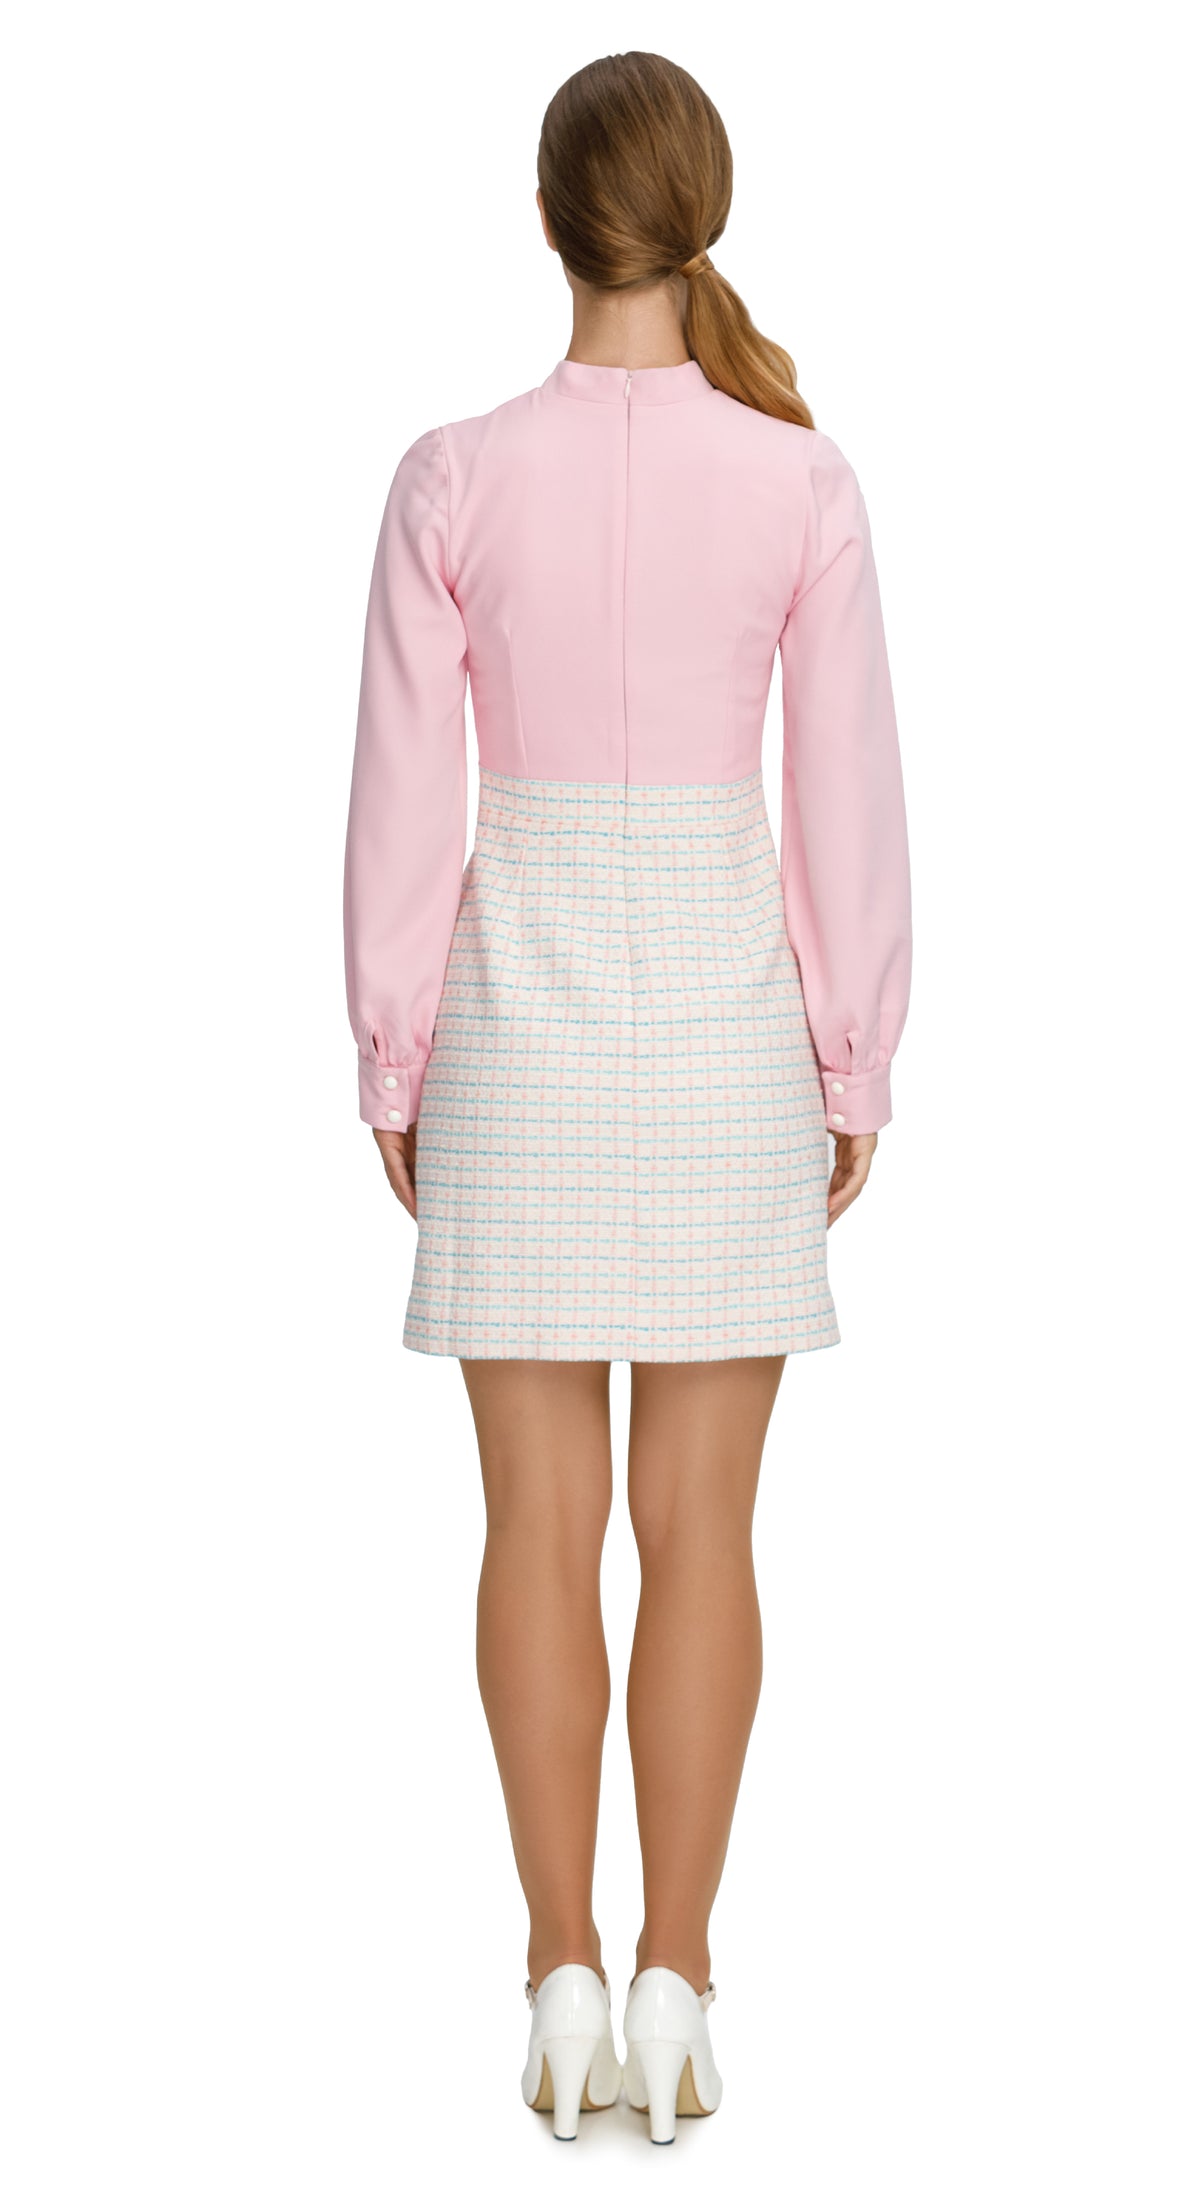 Charming and sophisticated, our ecru/pink/blue boucle dress offers a modern twist on classic elegance. Crafted from soft pink fabric top and boucle bottom, it provides comfort without sacrificing style. The long sleeves boast fitted cuffs for a tailored appearance, while the bow detailing adds a playful touch.